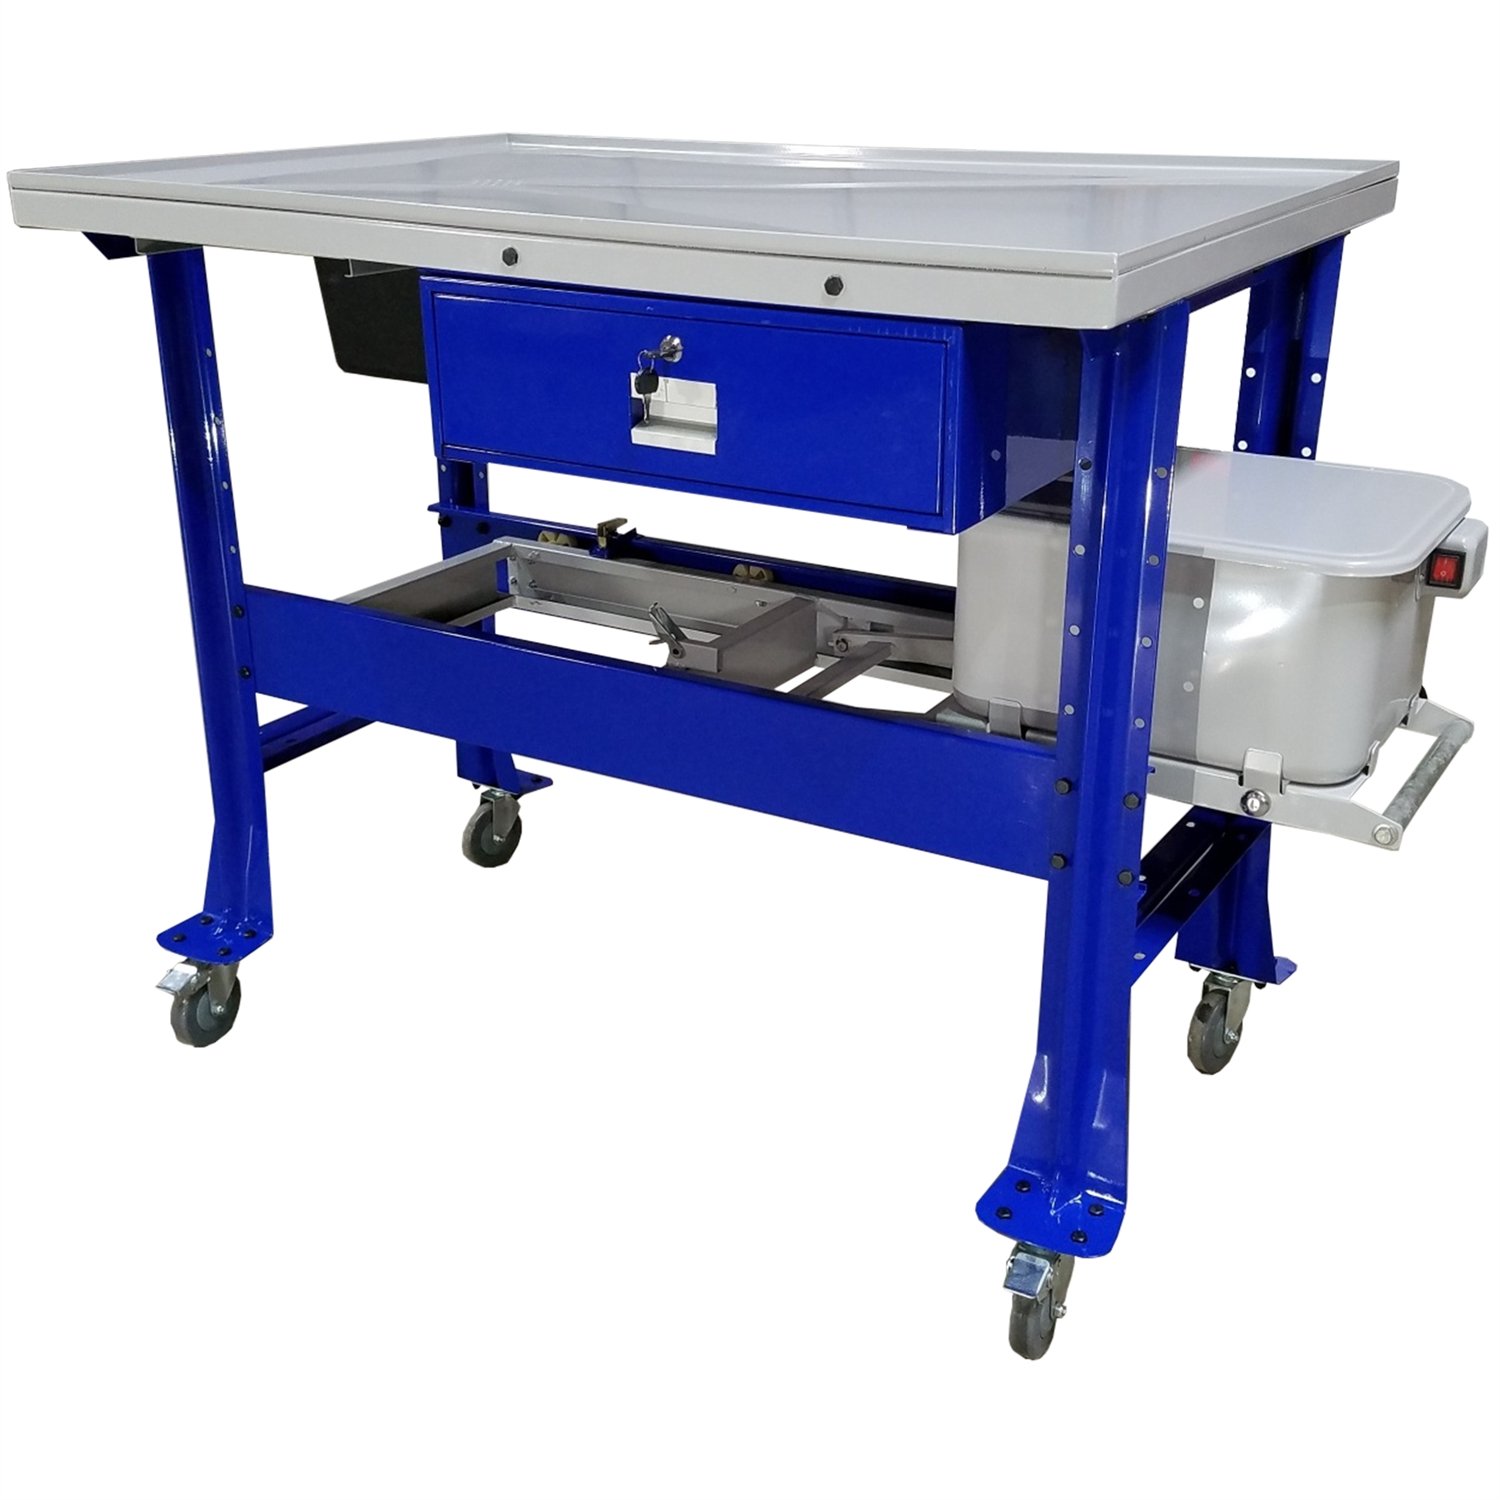 Premium Tear Down Table with Parts Washer [1,000 lb. Capacity]